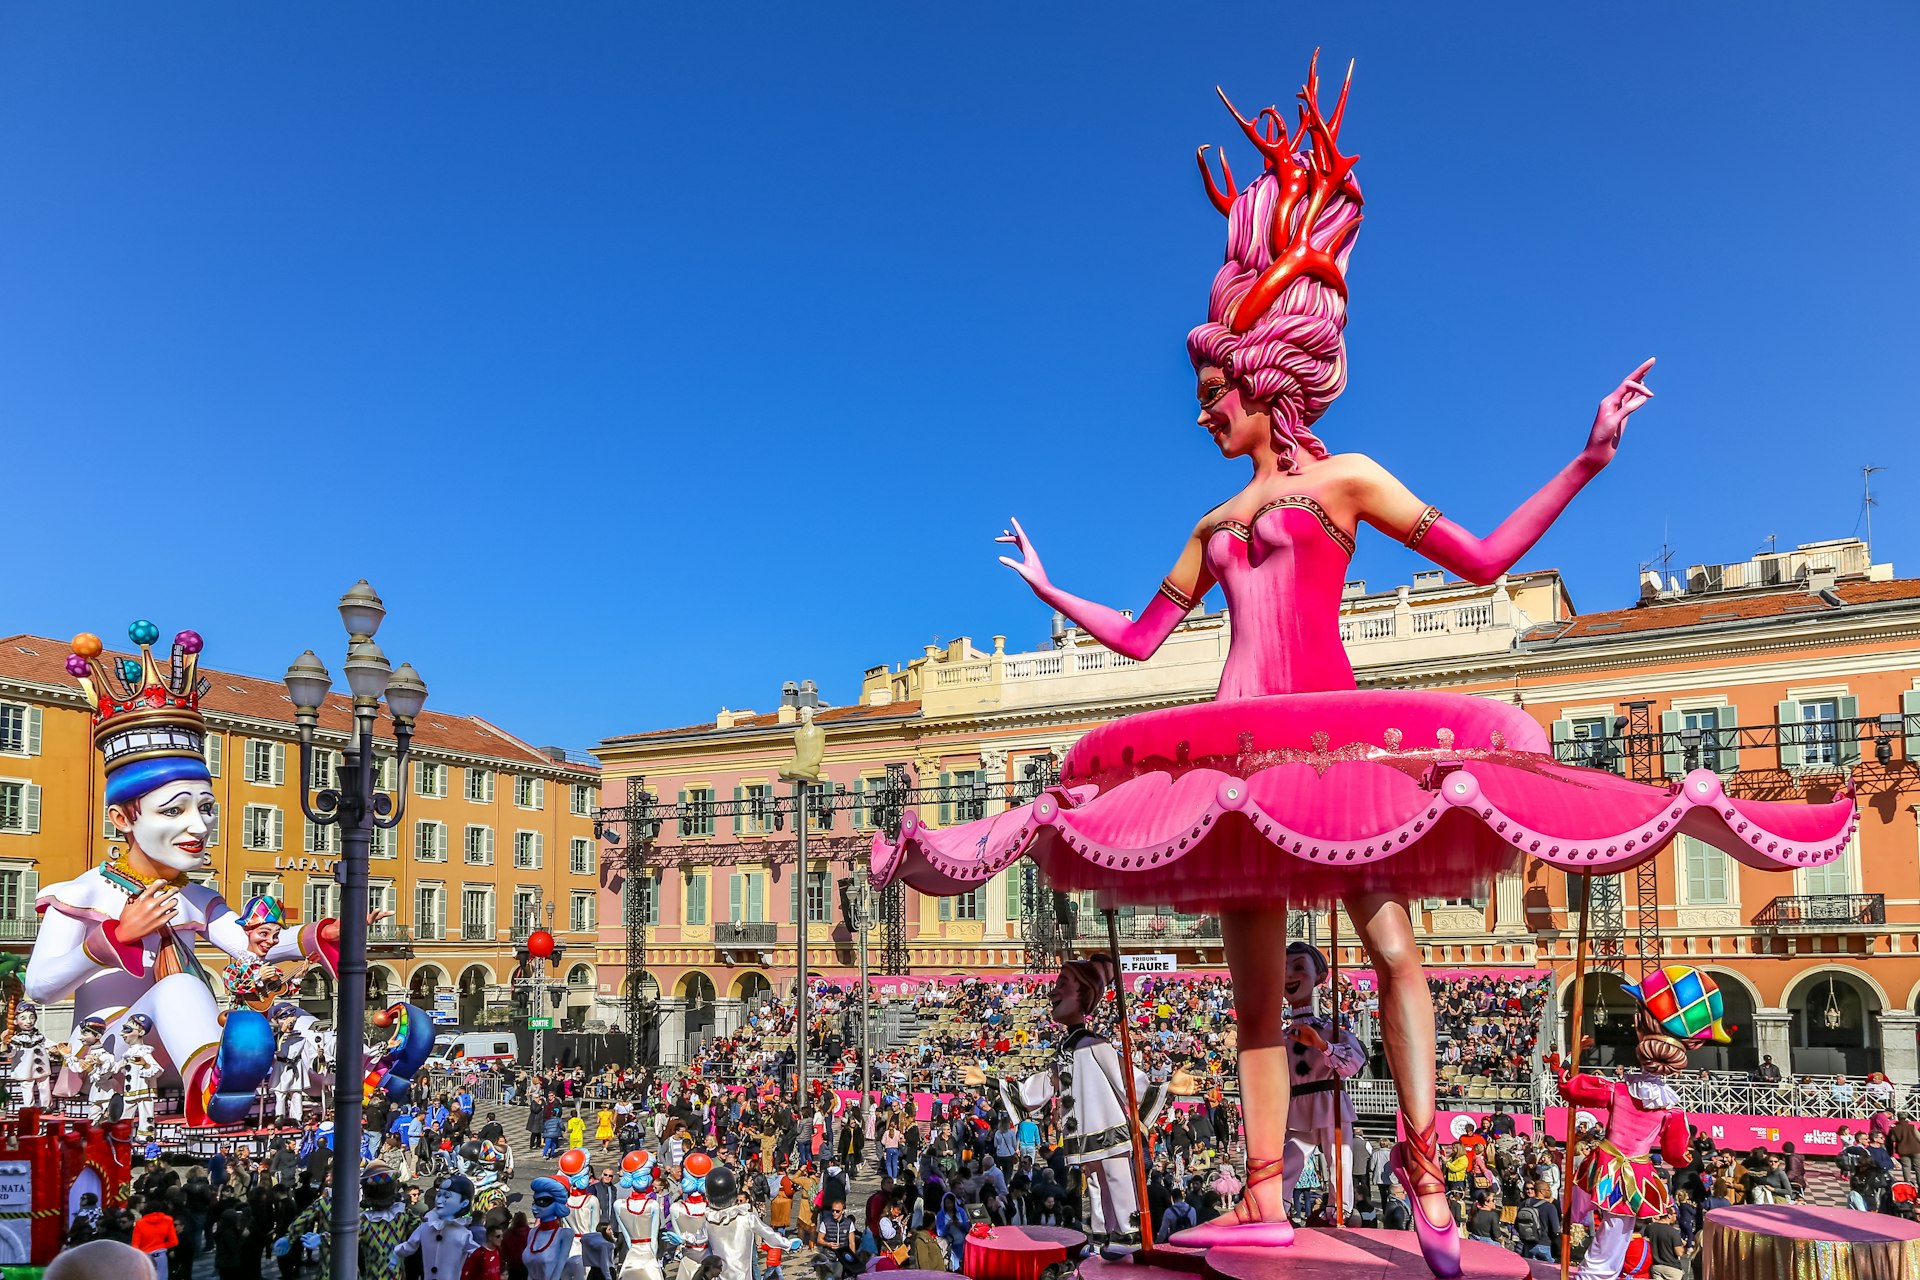 A huge pink ballerina sculpture dominates a carnival float in Nice, France. Crowds of people mingle around the parade